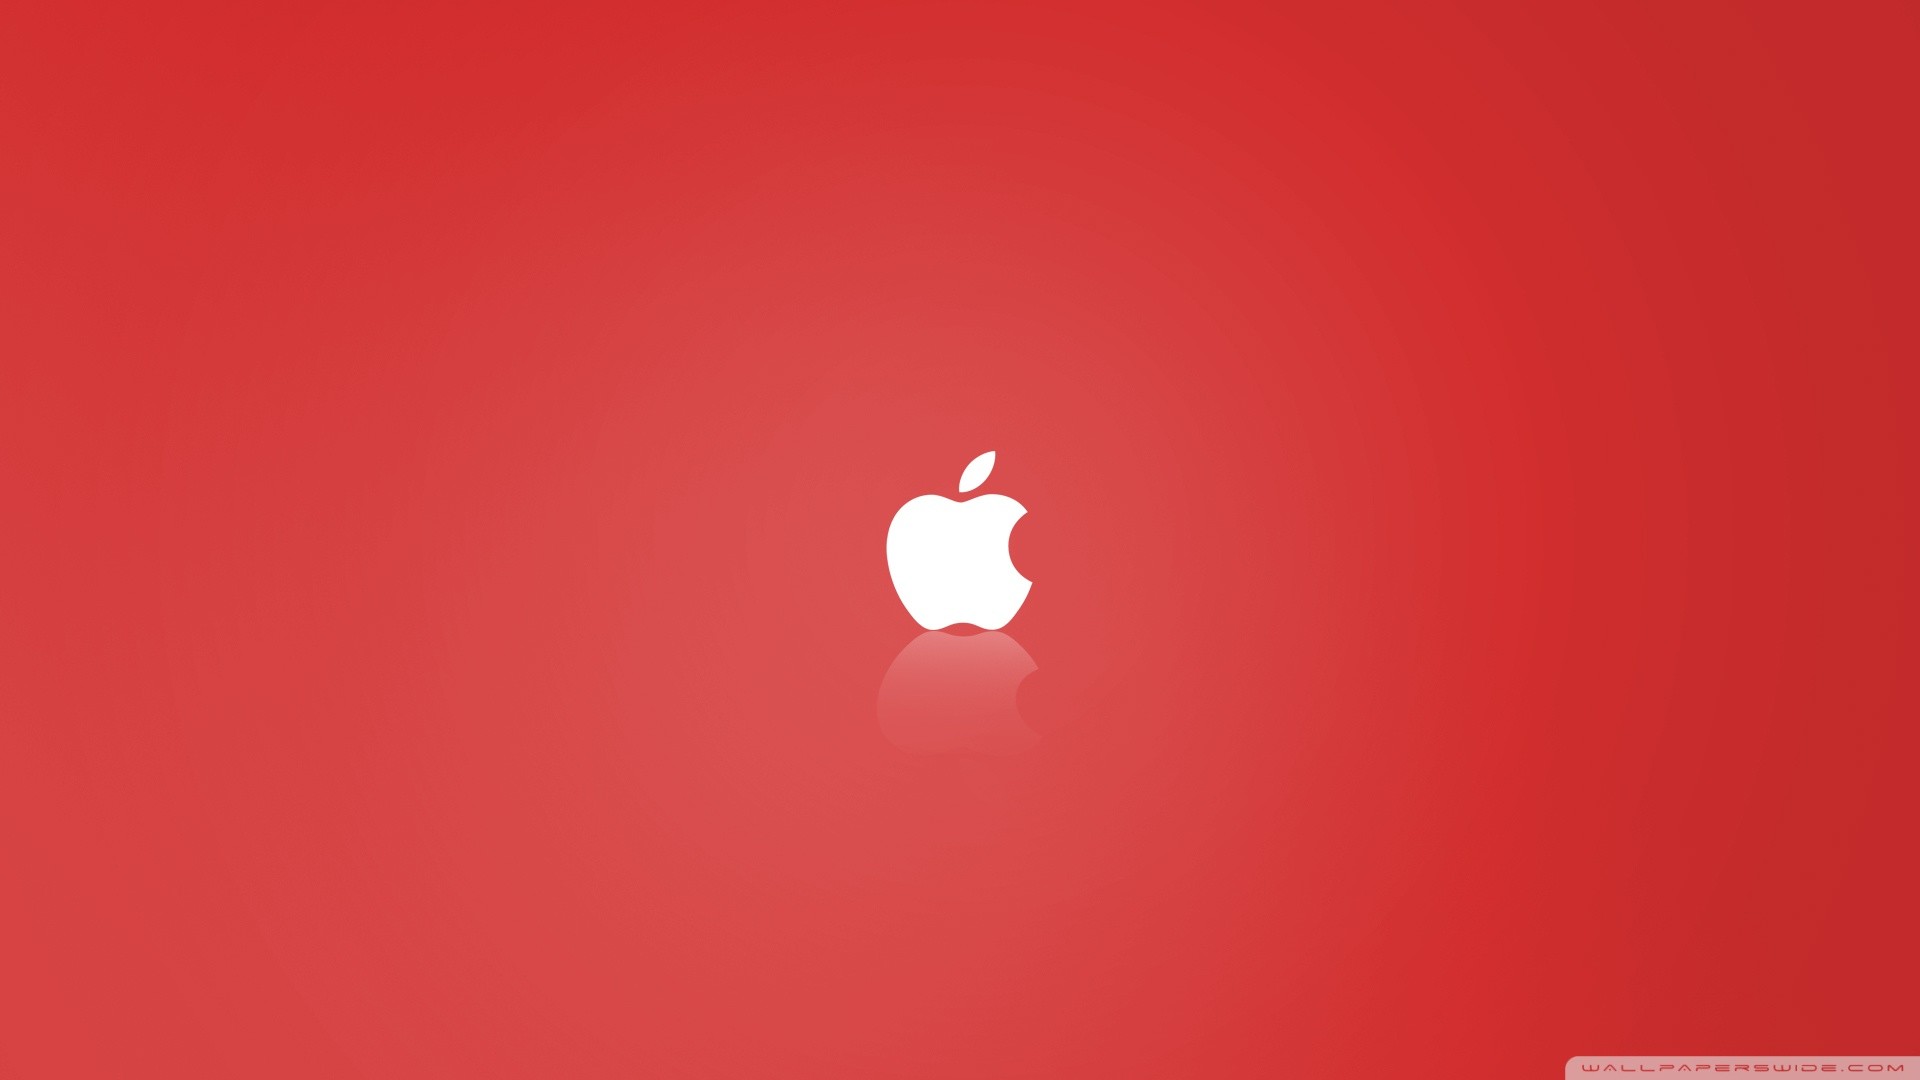 1920x1080 ... iPhone 7 (PRODUCT)RED-inspired wallpapers ...